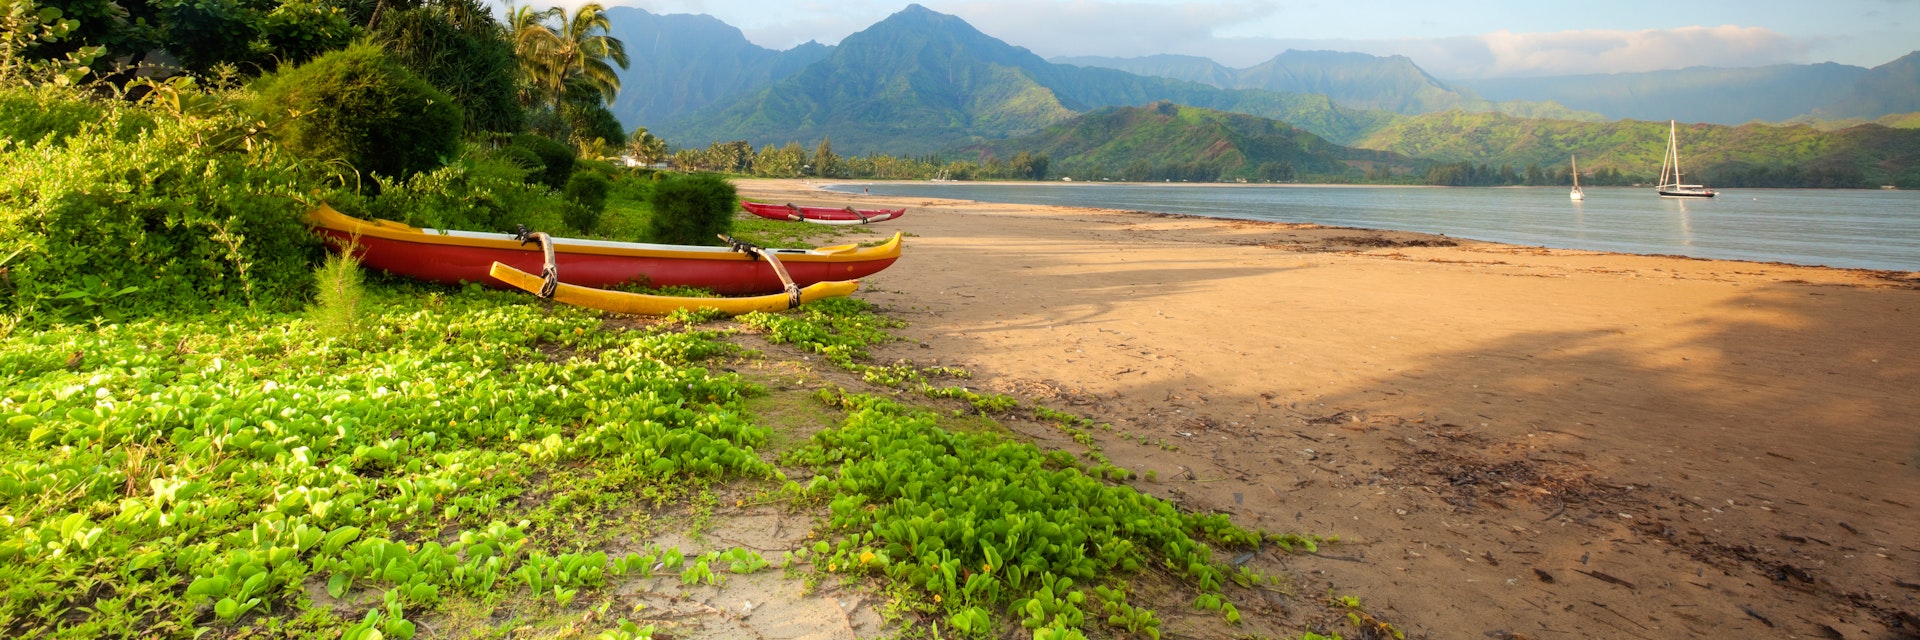 Outrigger canoe near the beach of Hanalei Bay just after sunrise.